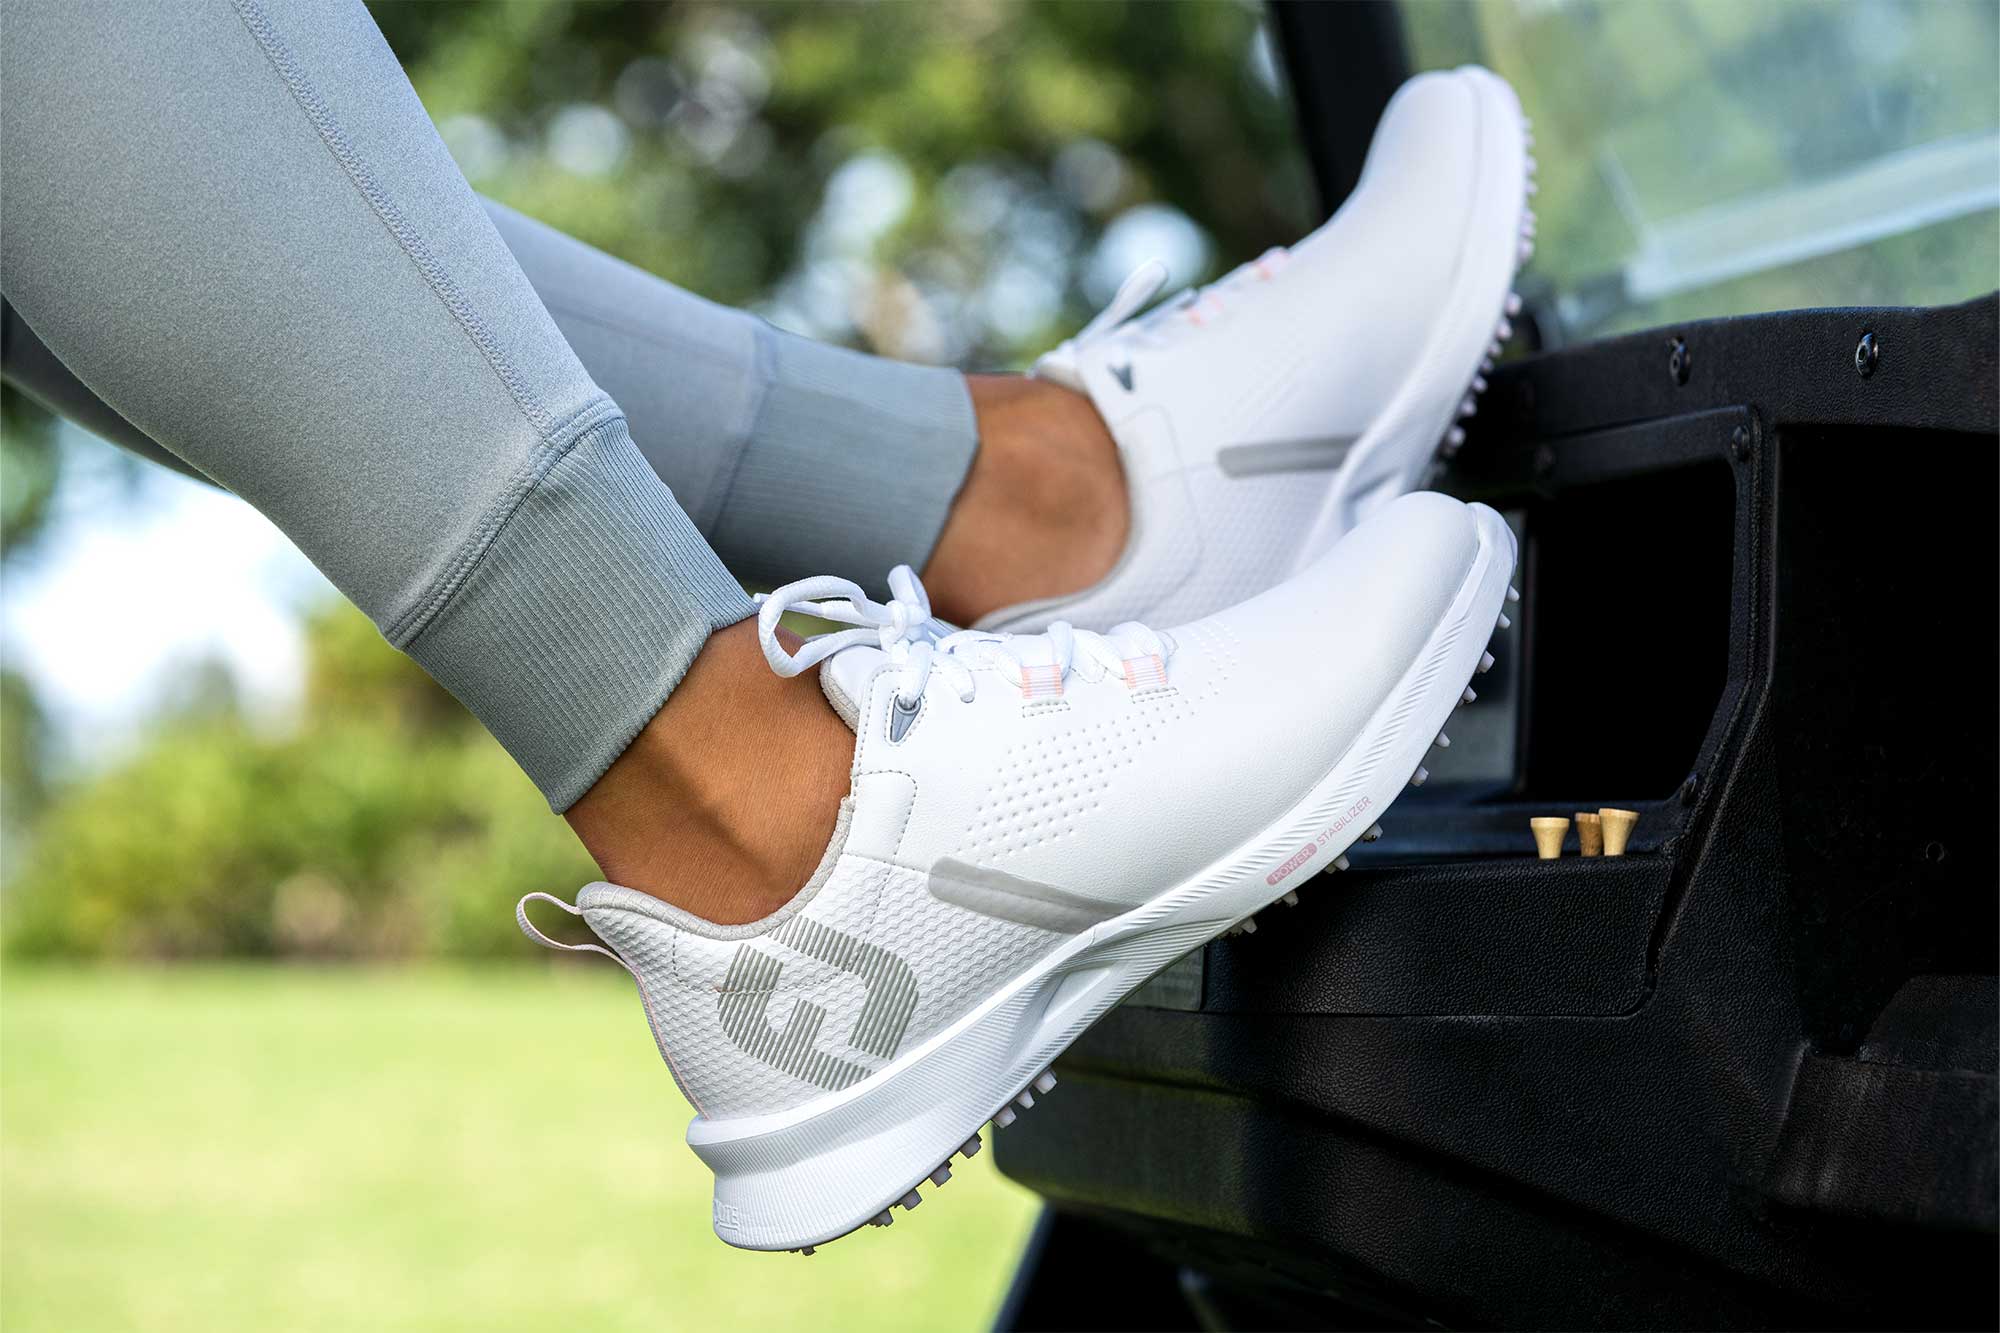 write a blog about The Best Golf Shoes for Women: Style and Functionality